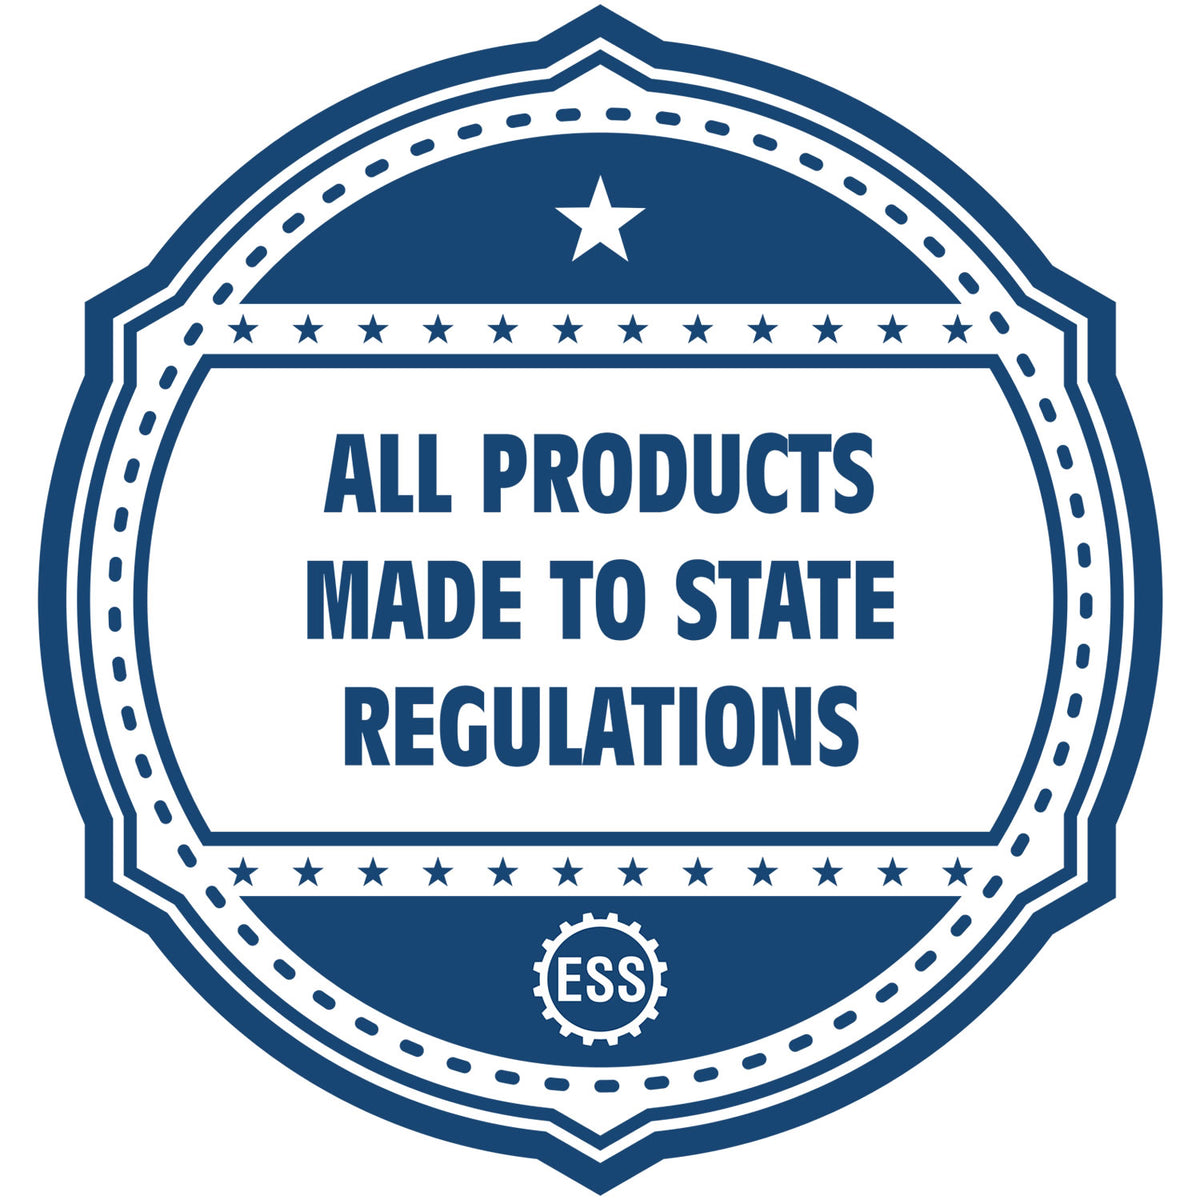 An icon or badge element for the Wooden Handle Alabama State Seal Notary Public Stamp showing that this product is made in compliance with state regulations.